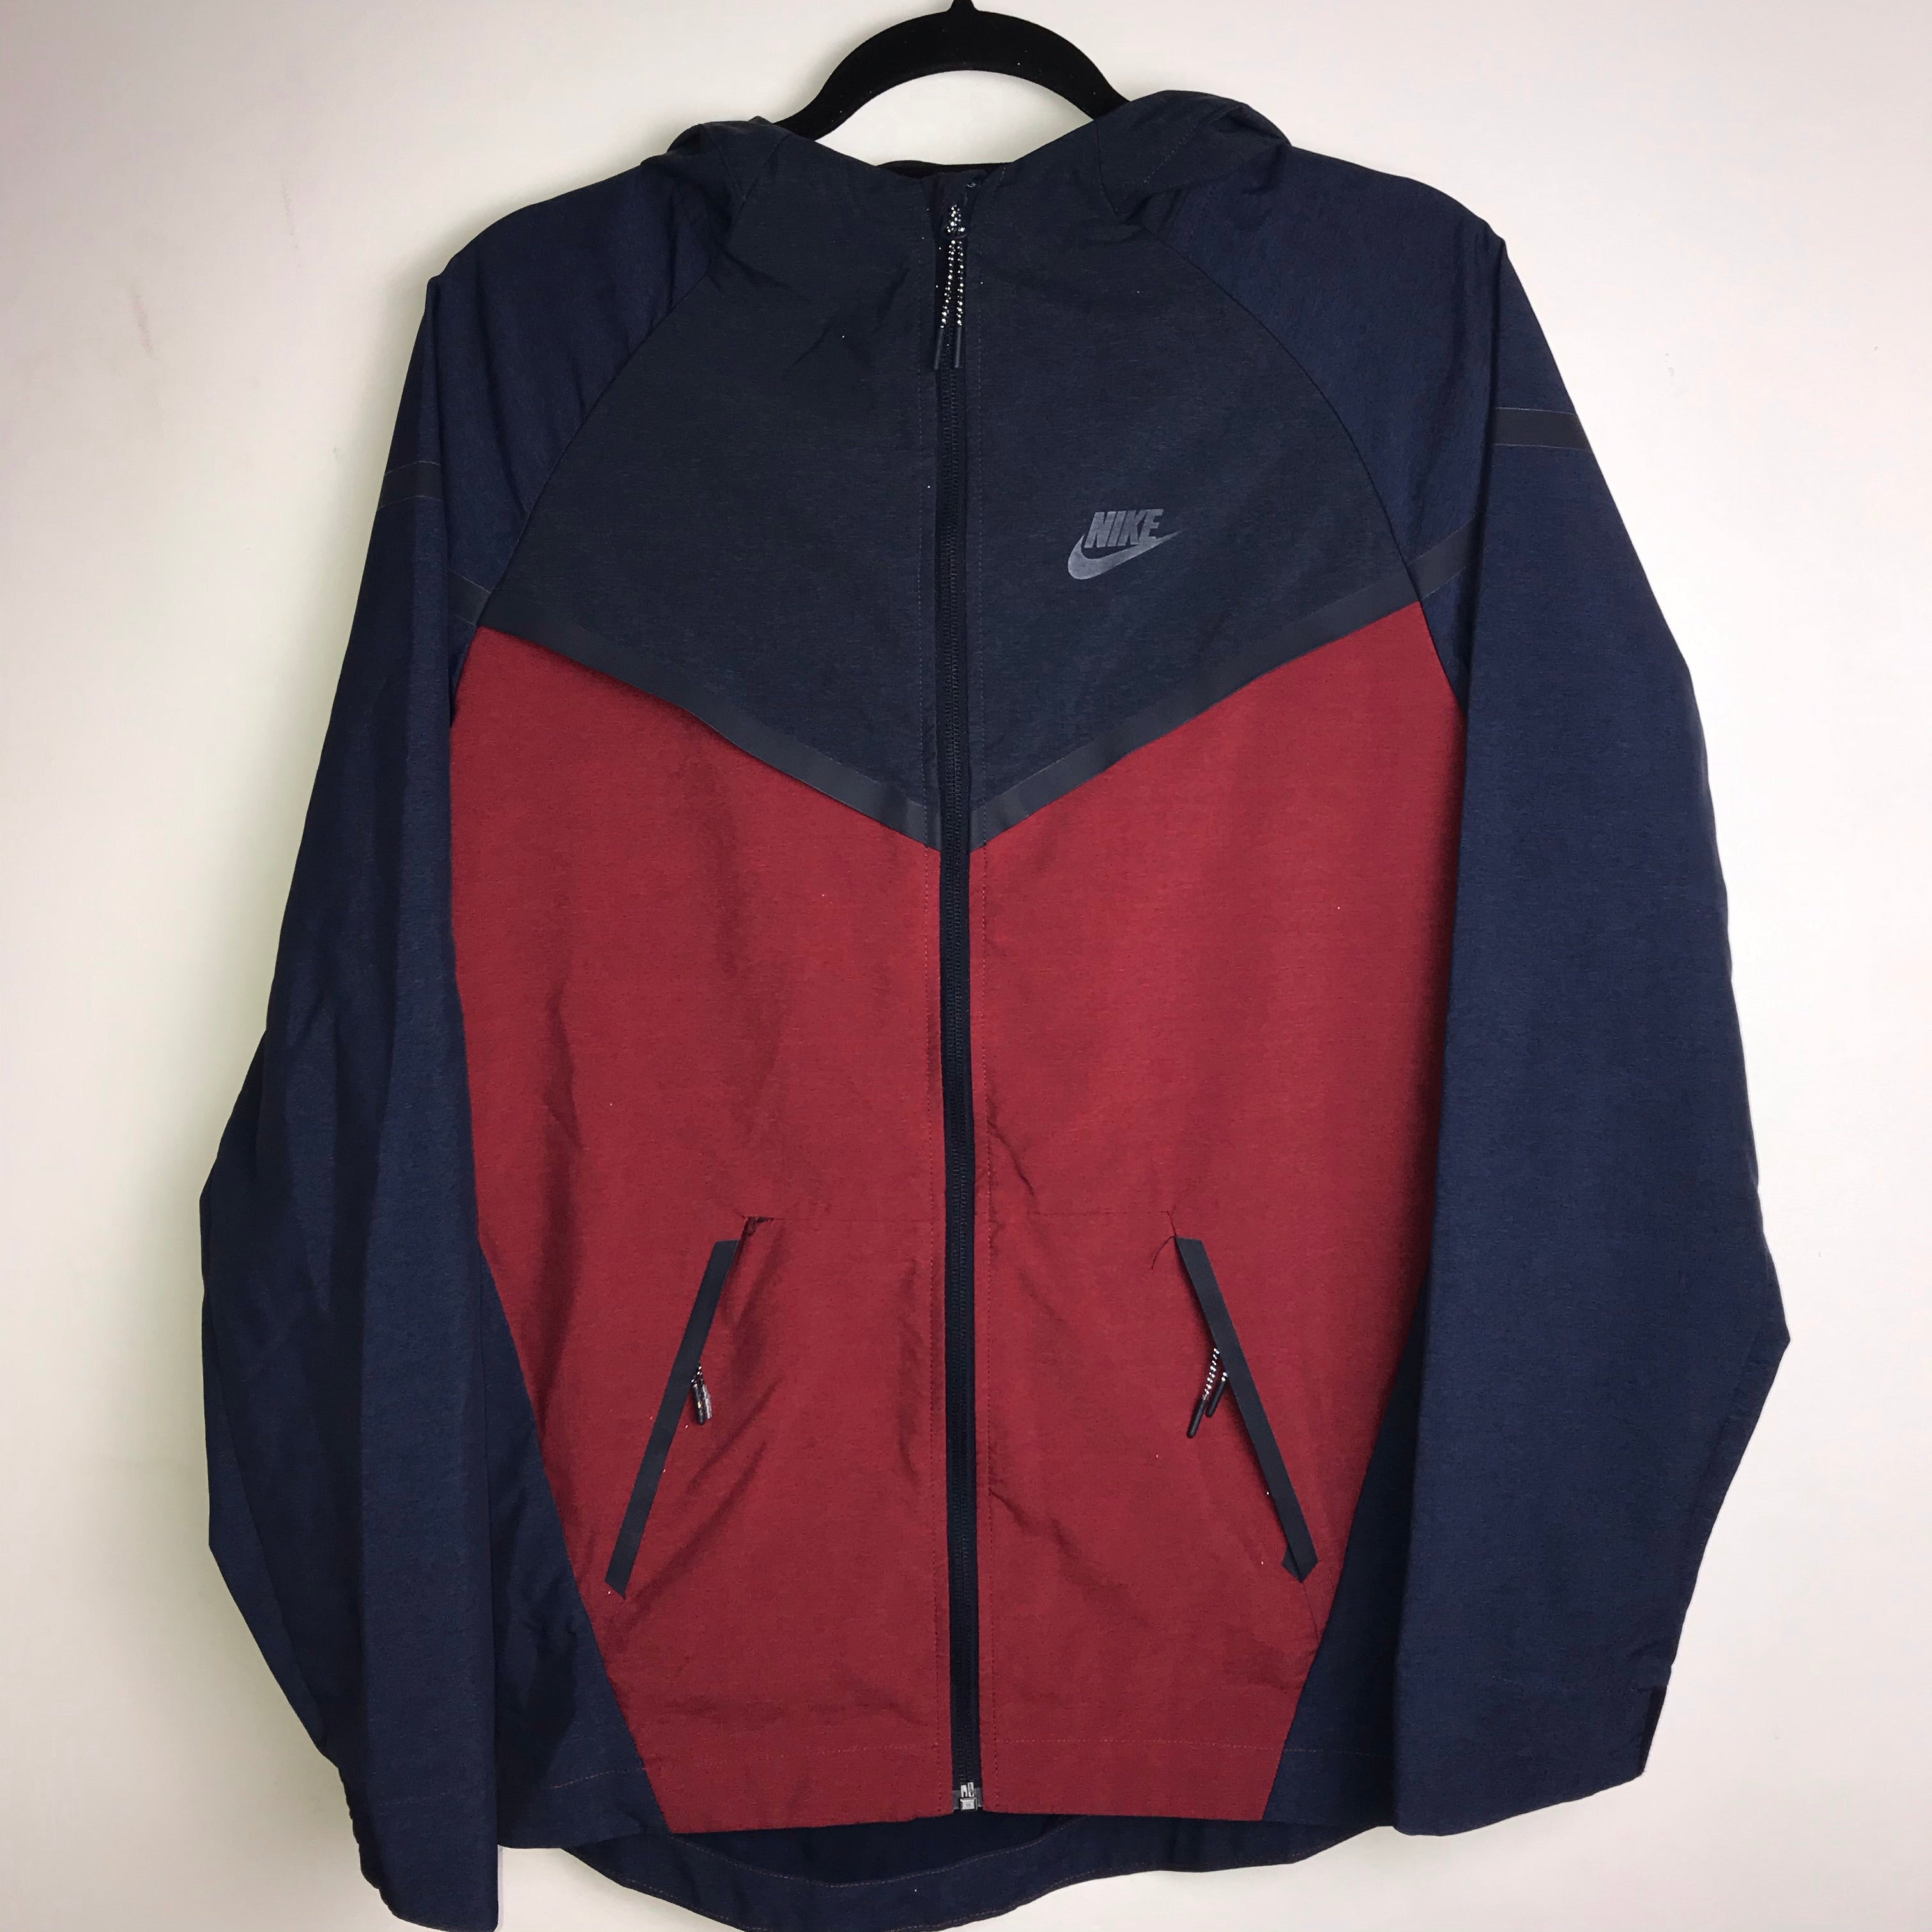 Intacto queso parcialidad Nike Tech Two Tone Waterproof Jacket ☔️ – DRIP_AVELI